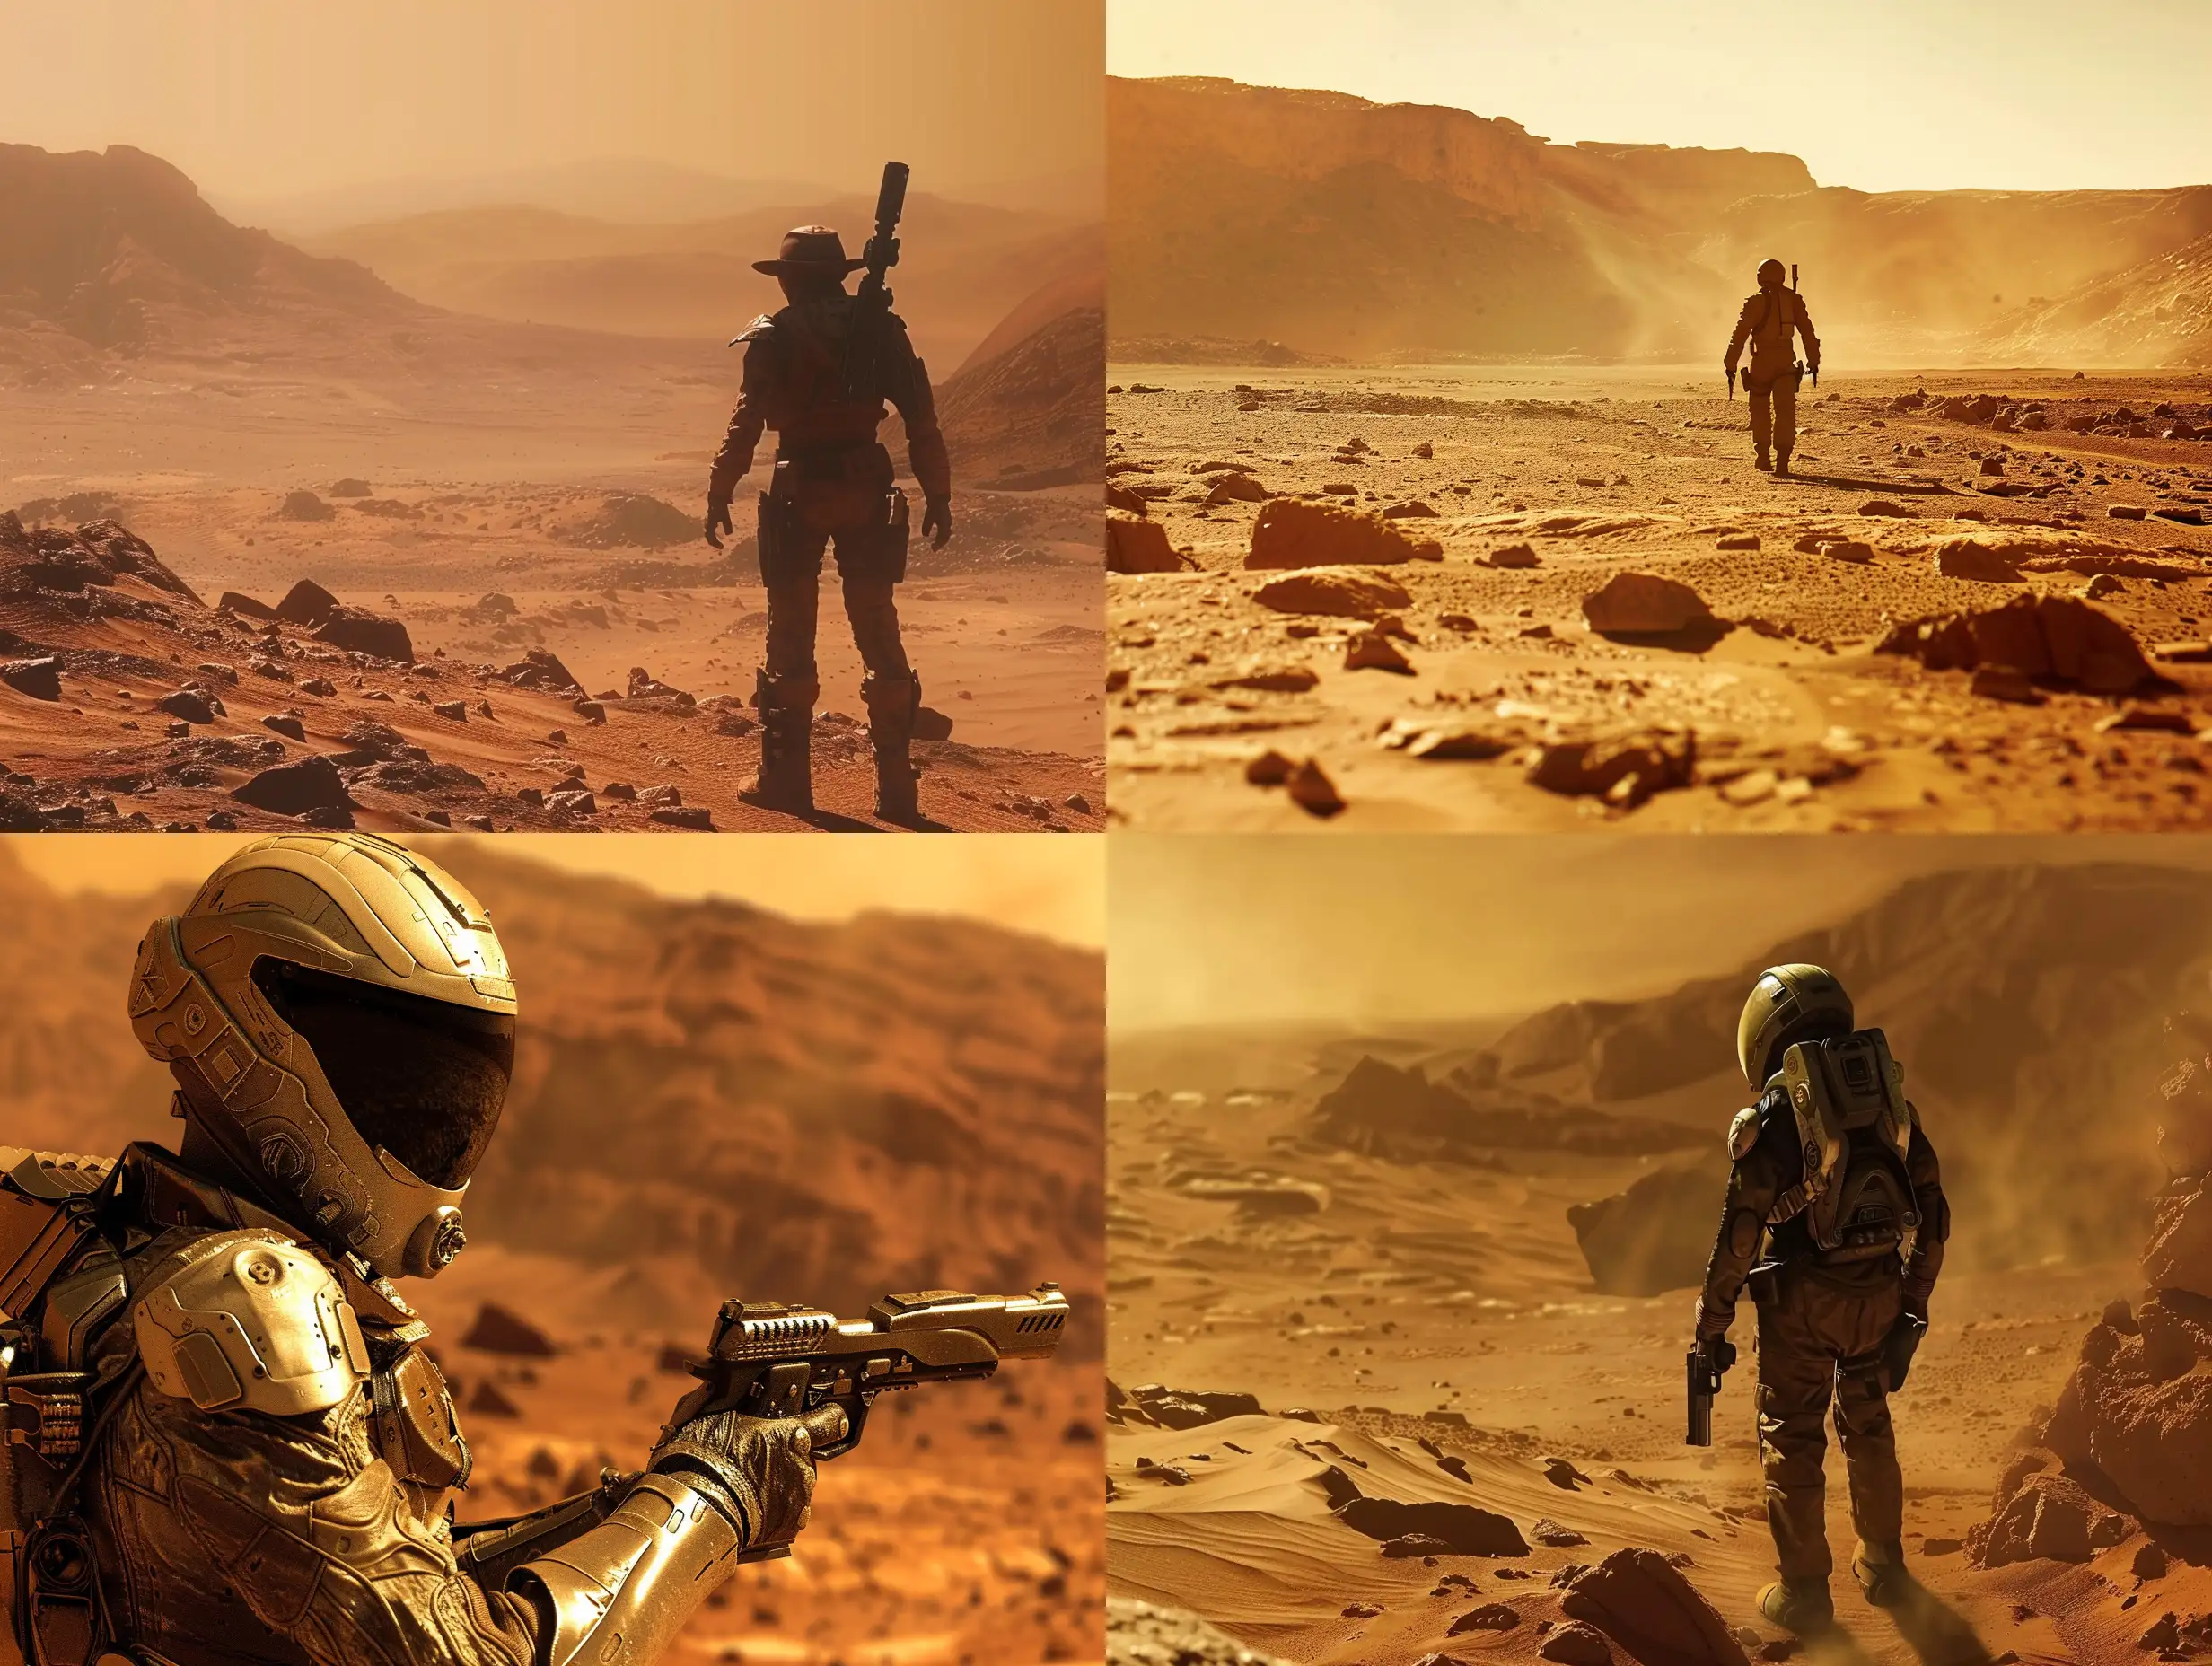 On Mars, a lone gunman, science fiction style